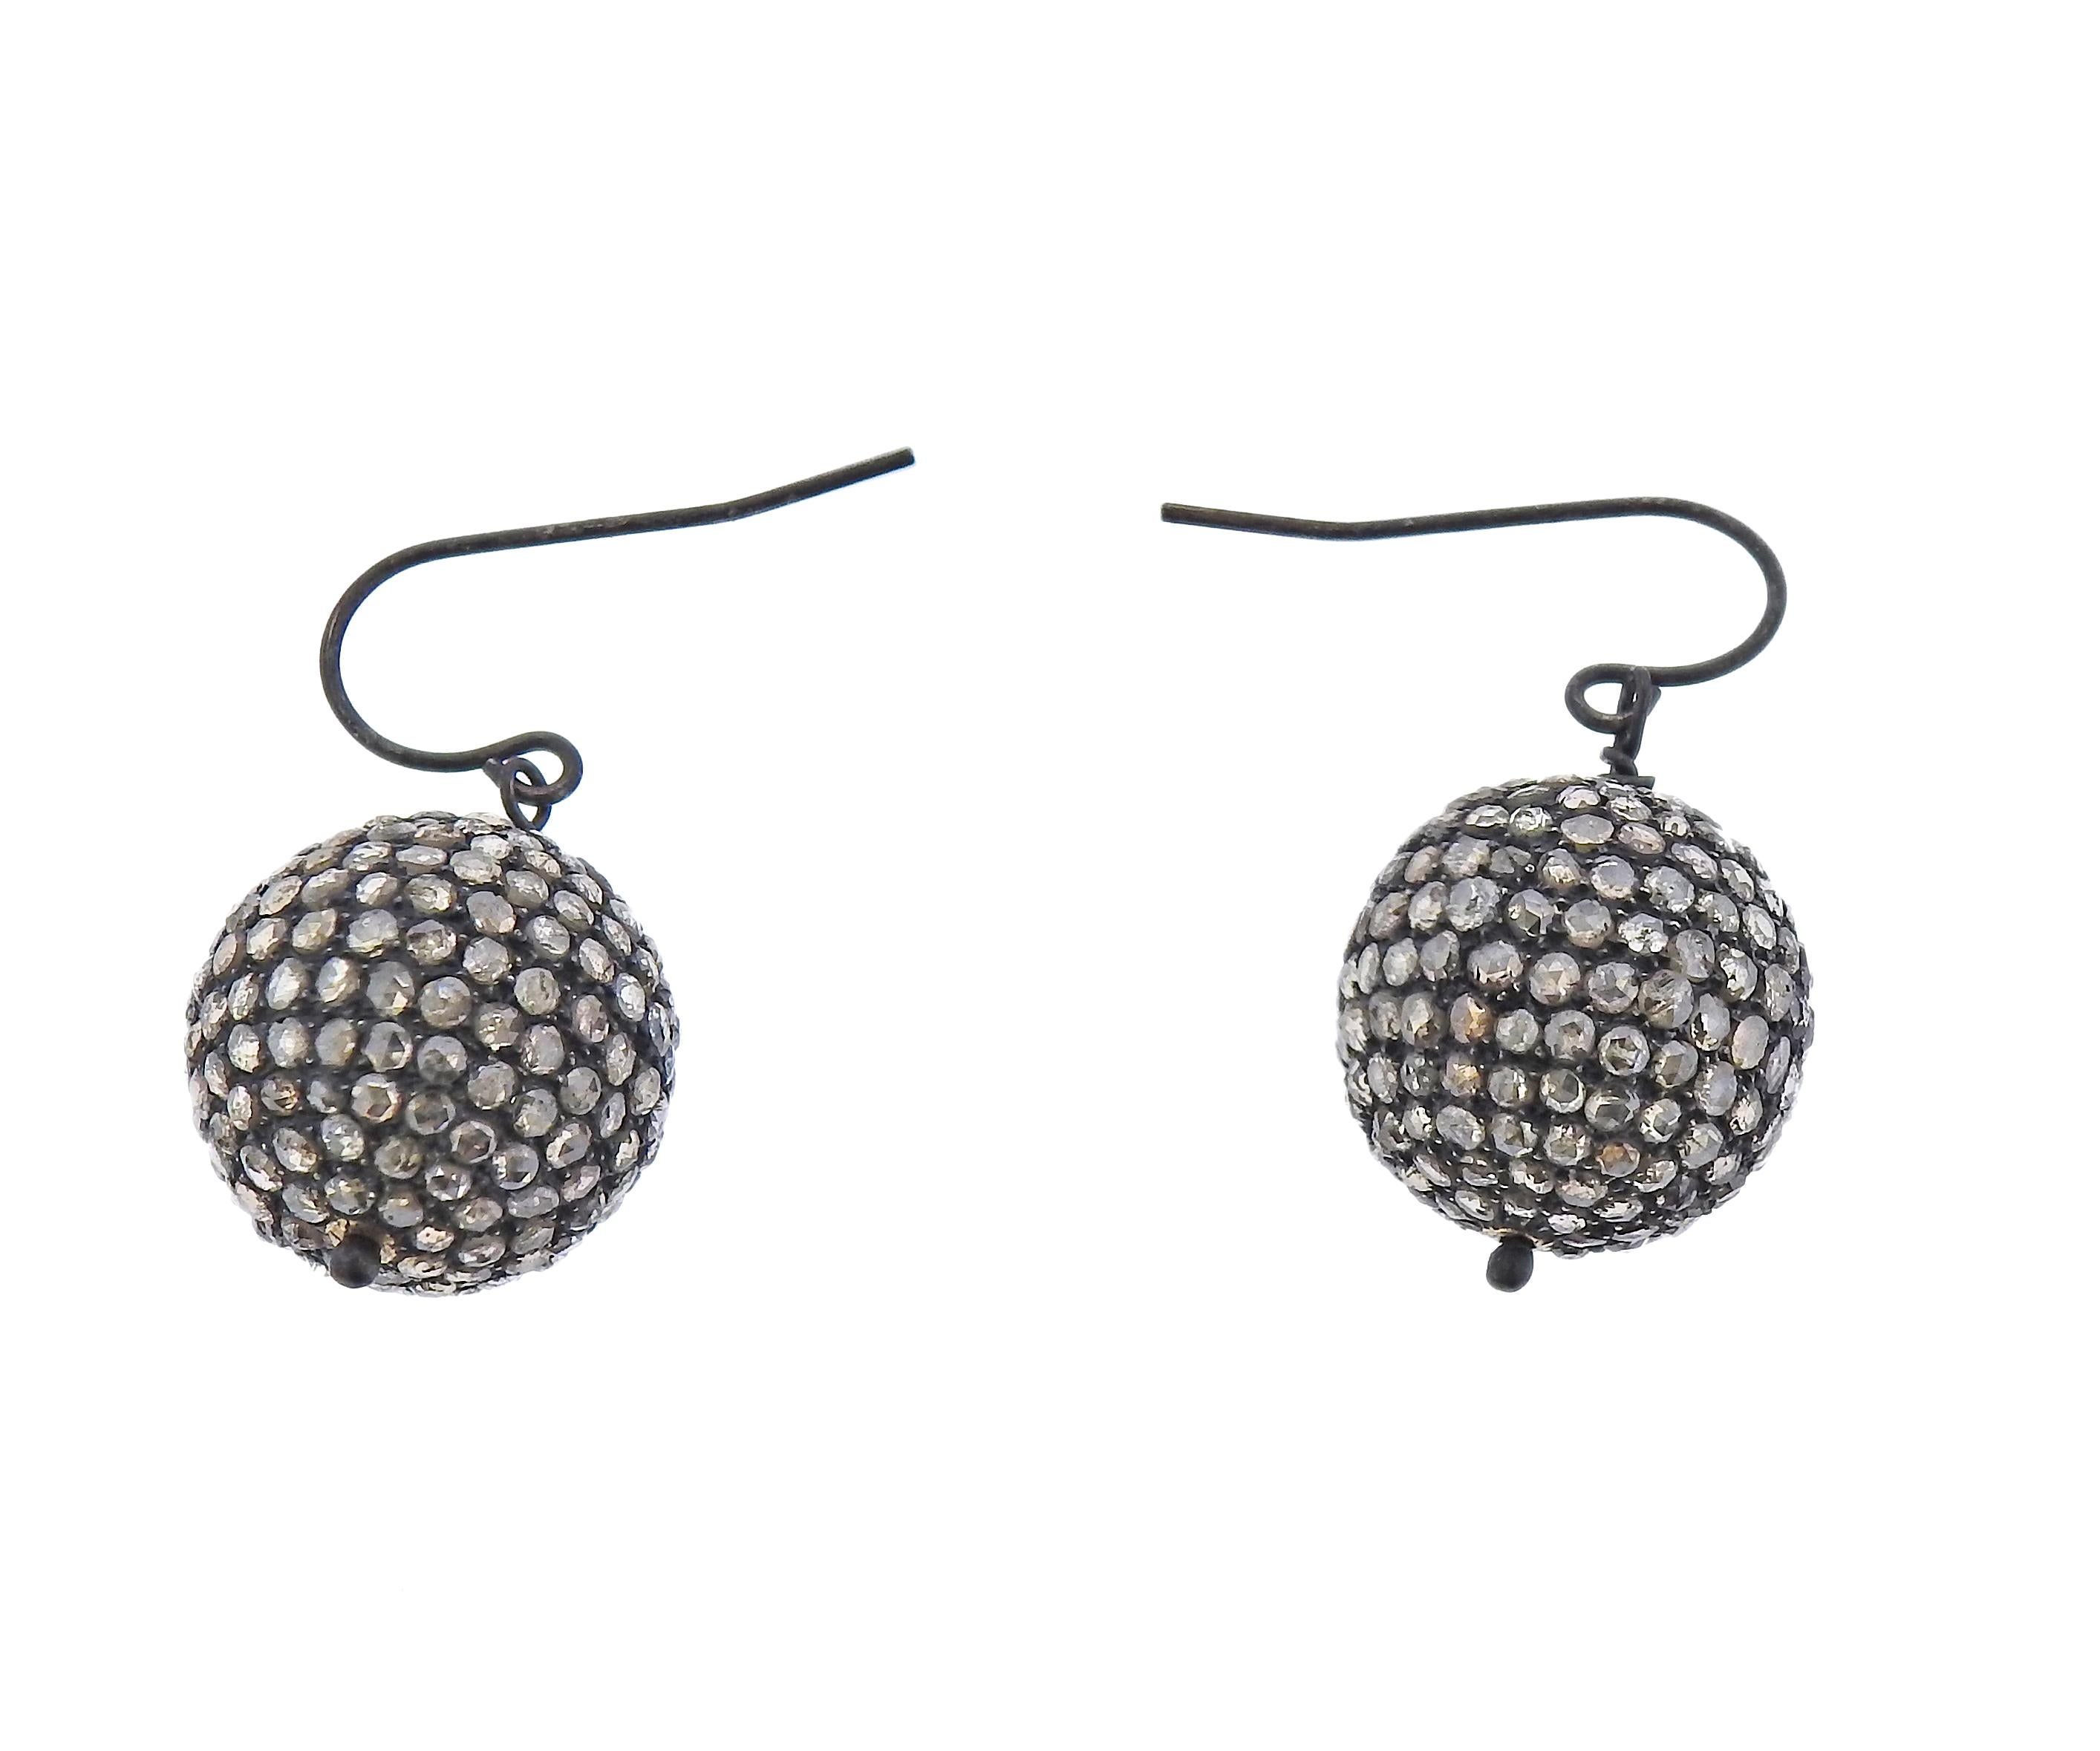 Pair of sterling silver ball drop earrings with rose cut diamonds. Earrings are 30mm long with wires, balls are 16mm in diameter. One diamond is missing. Weight - 10.3 grams. 